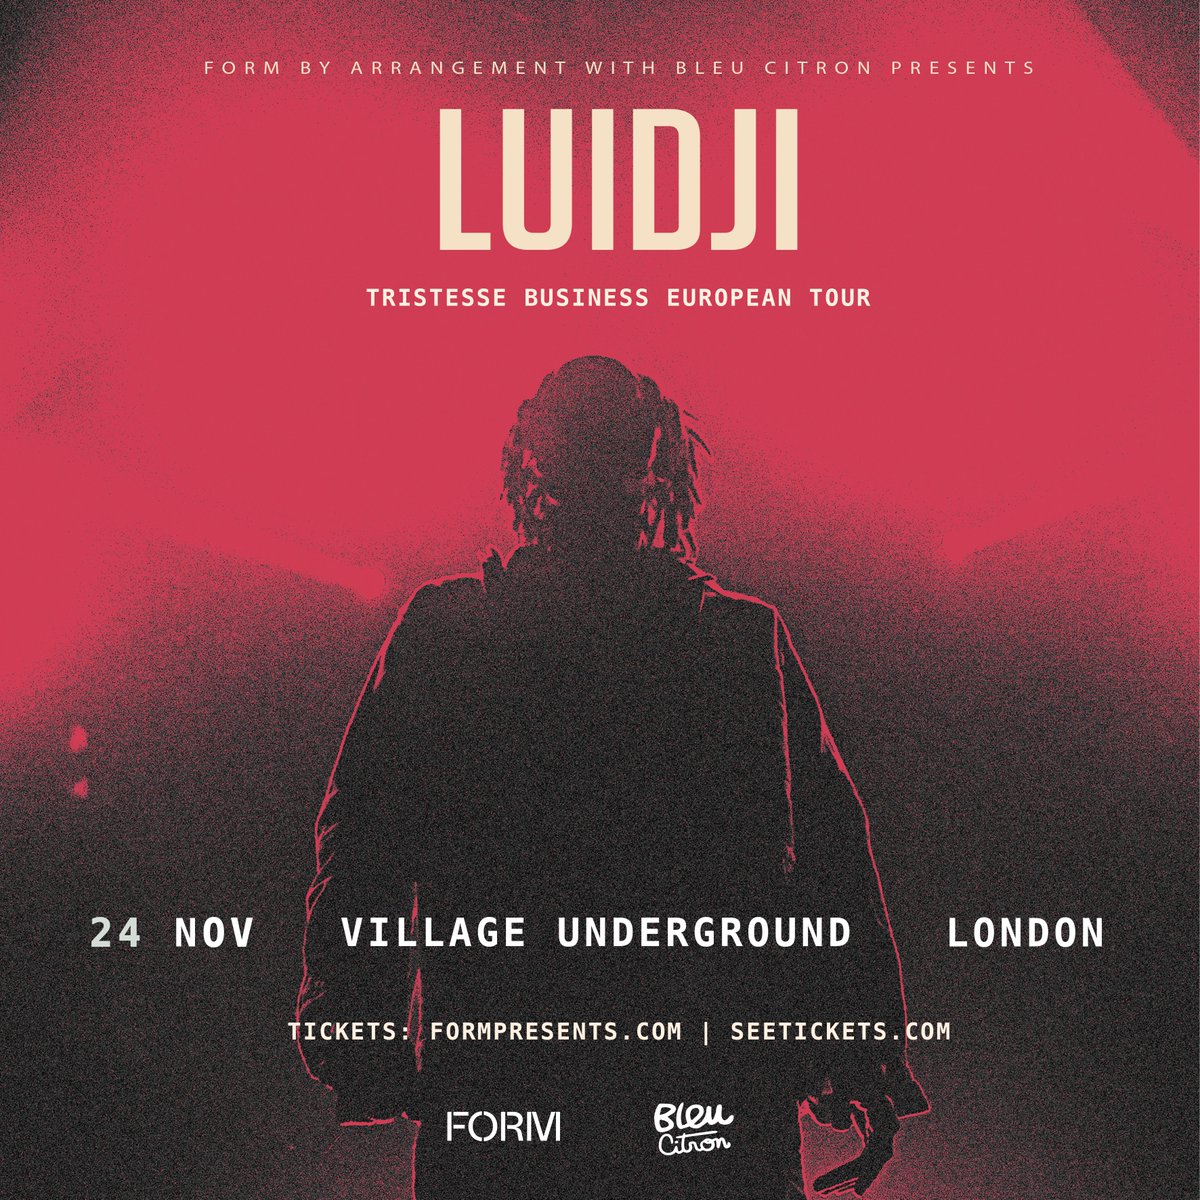 Founder of the Foufoune Palace collective, we're thrilled to announce that Paris-based artist @LuidjiAlexis will headline @villageundrgrnd, London on 24th November! 🎟 Tickets on sale Thursday at 10am.